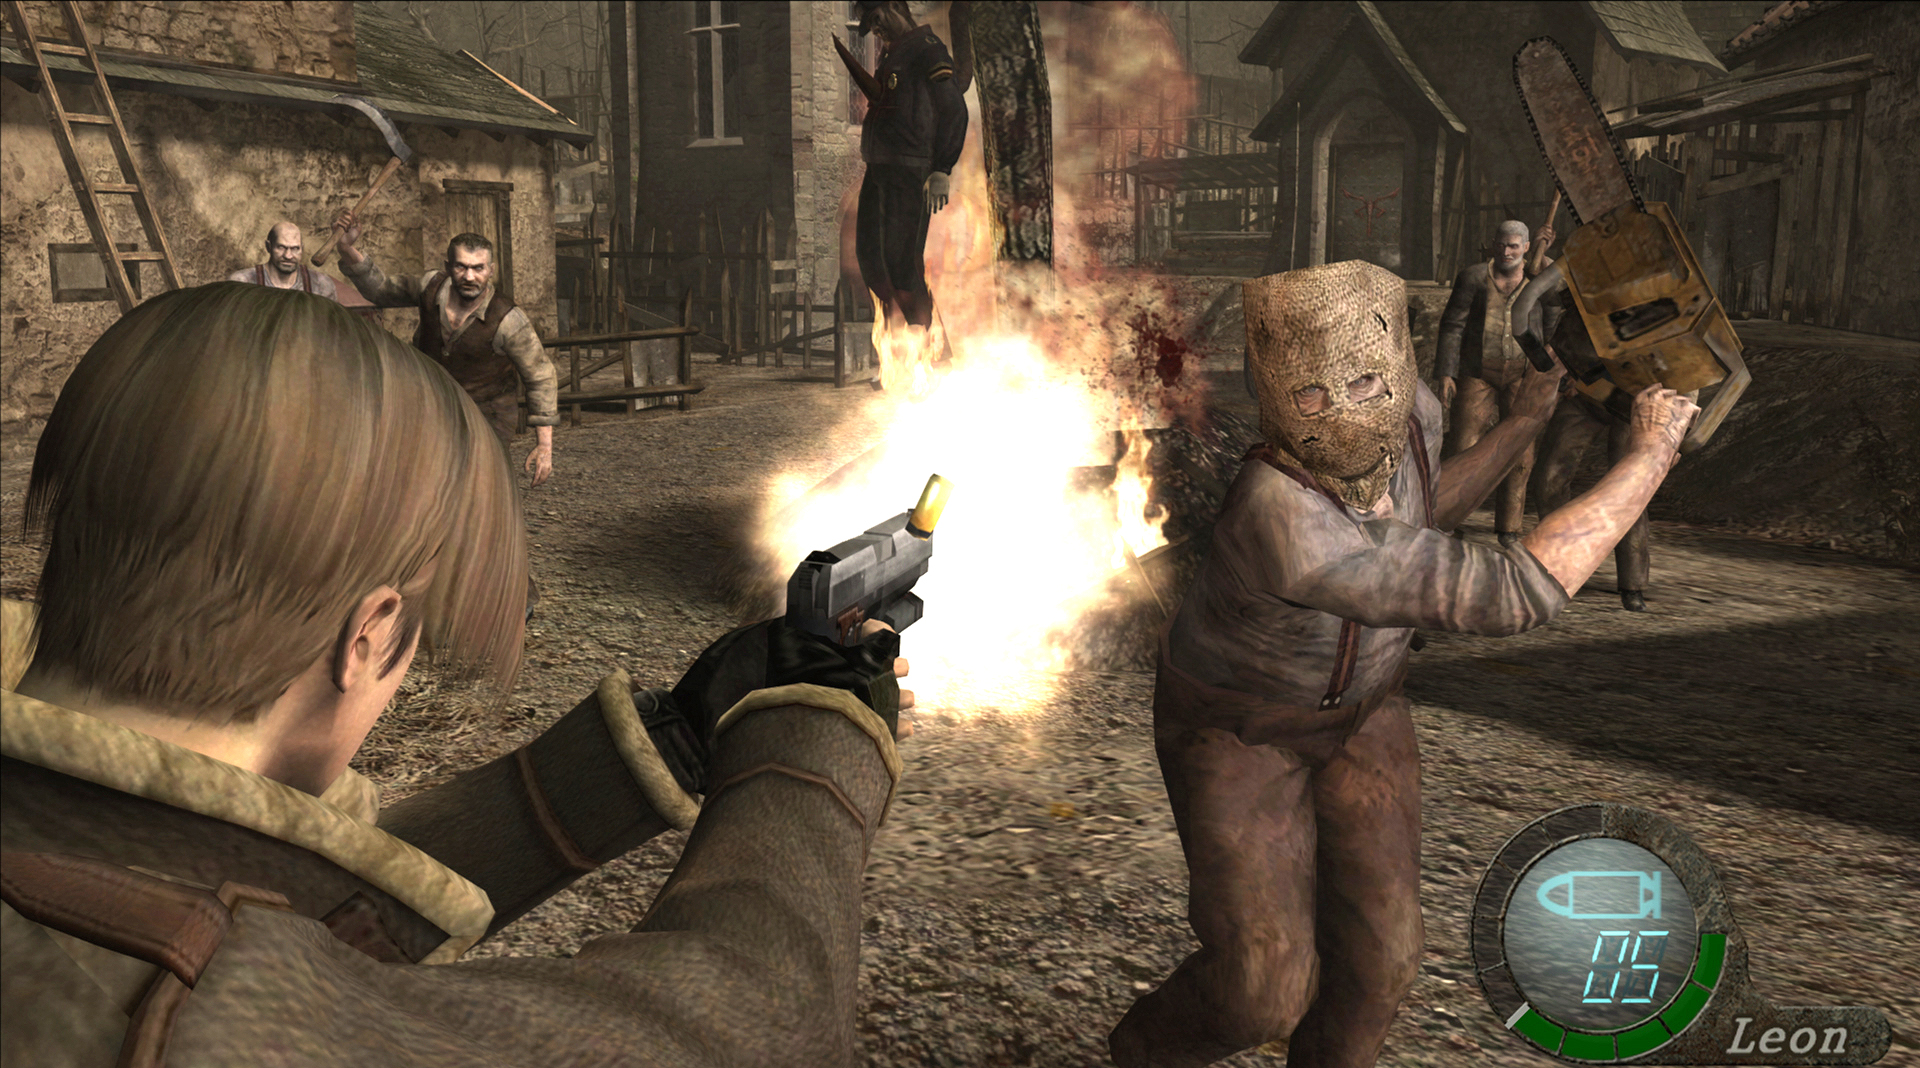 An image from the original Resident Evil 4.